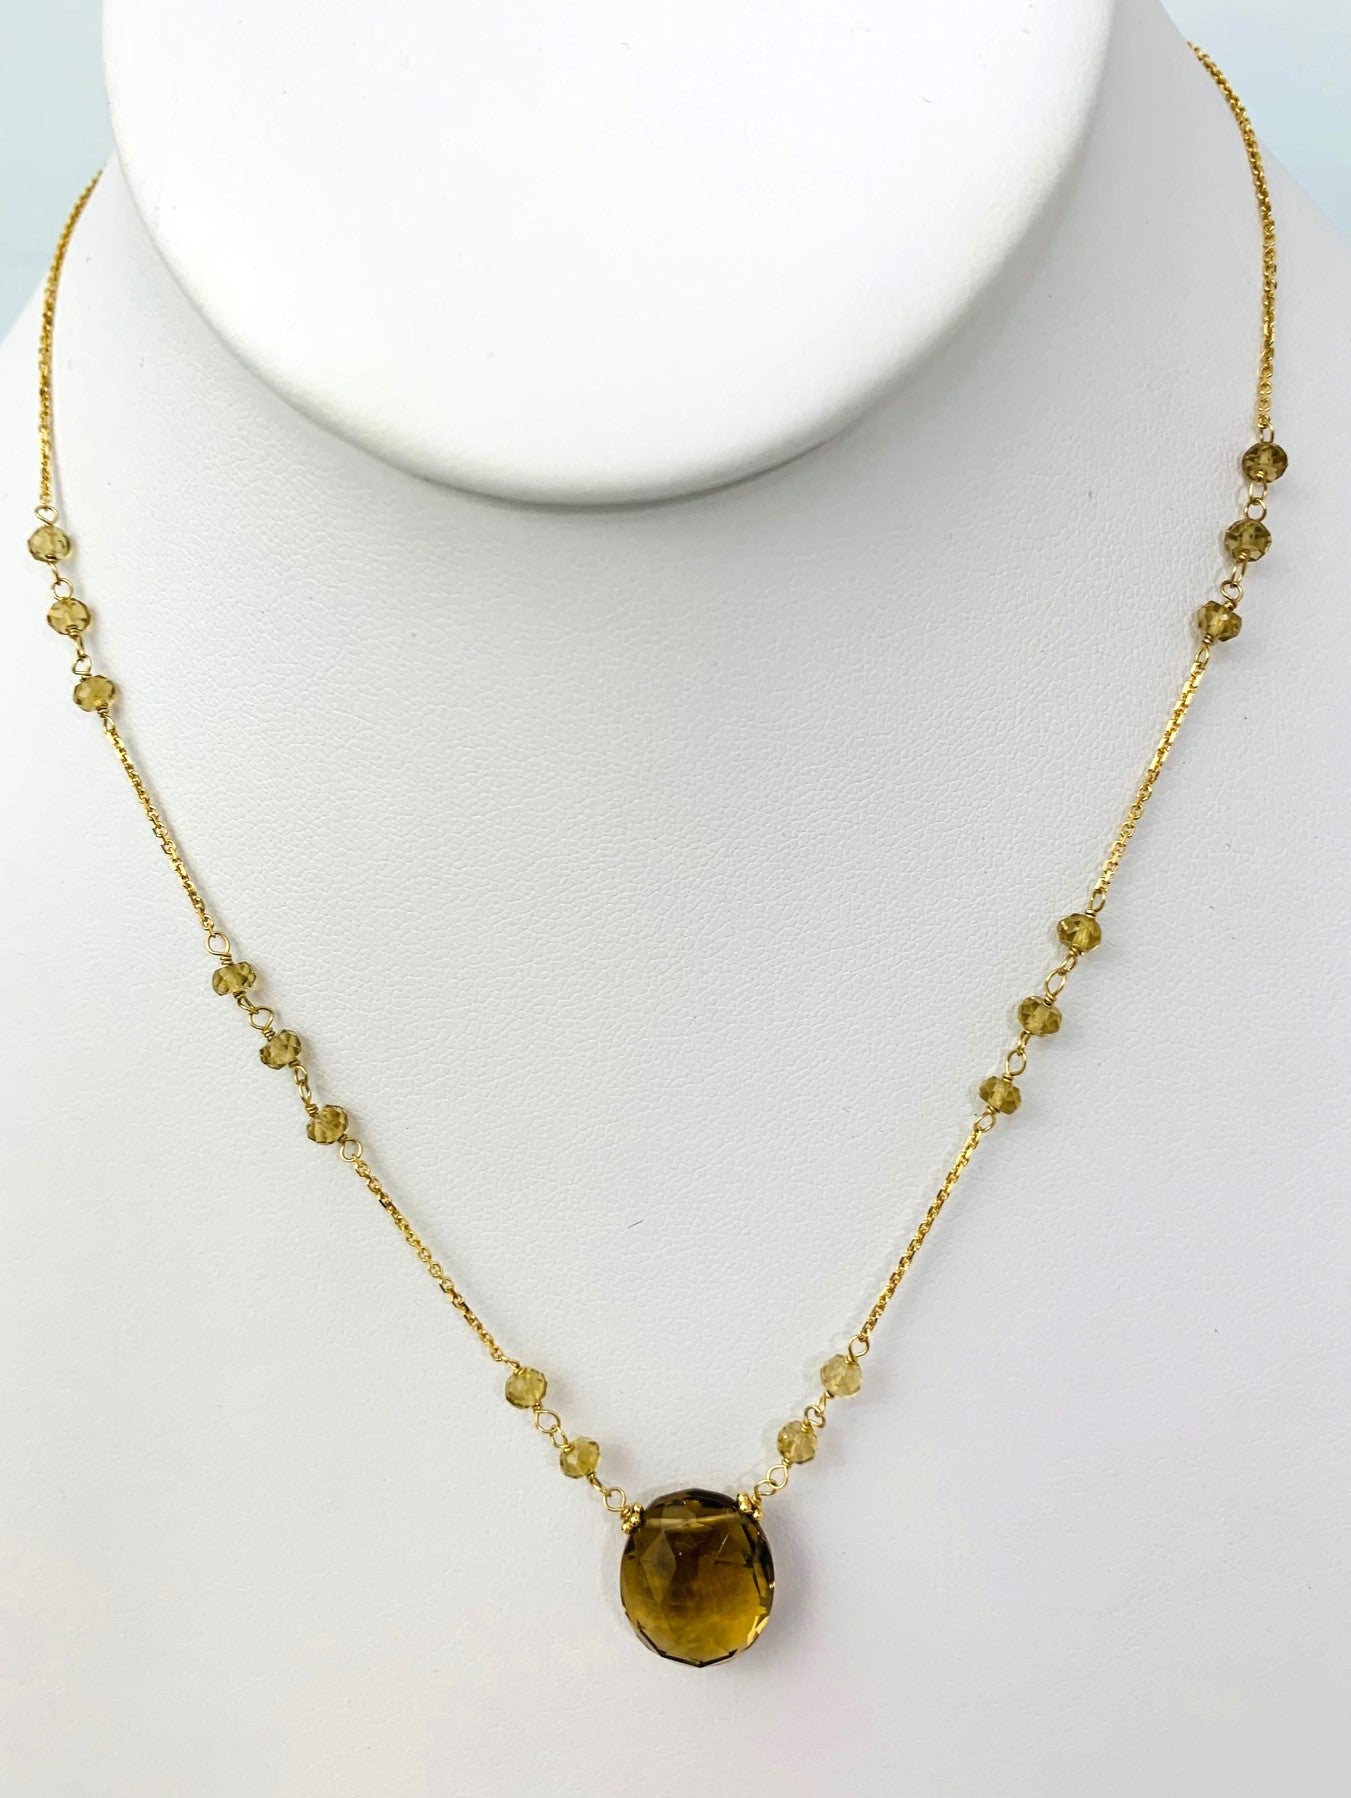 Clearance Sale! - 16-17" Honey Quartz Station Necklace With Oval Center in 14KY - NCK-380-TNCGM14Y-HQ-17